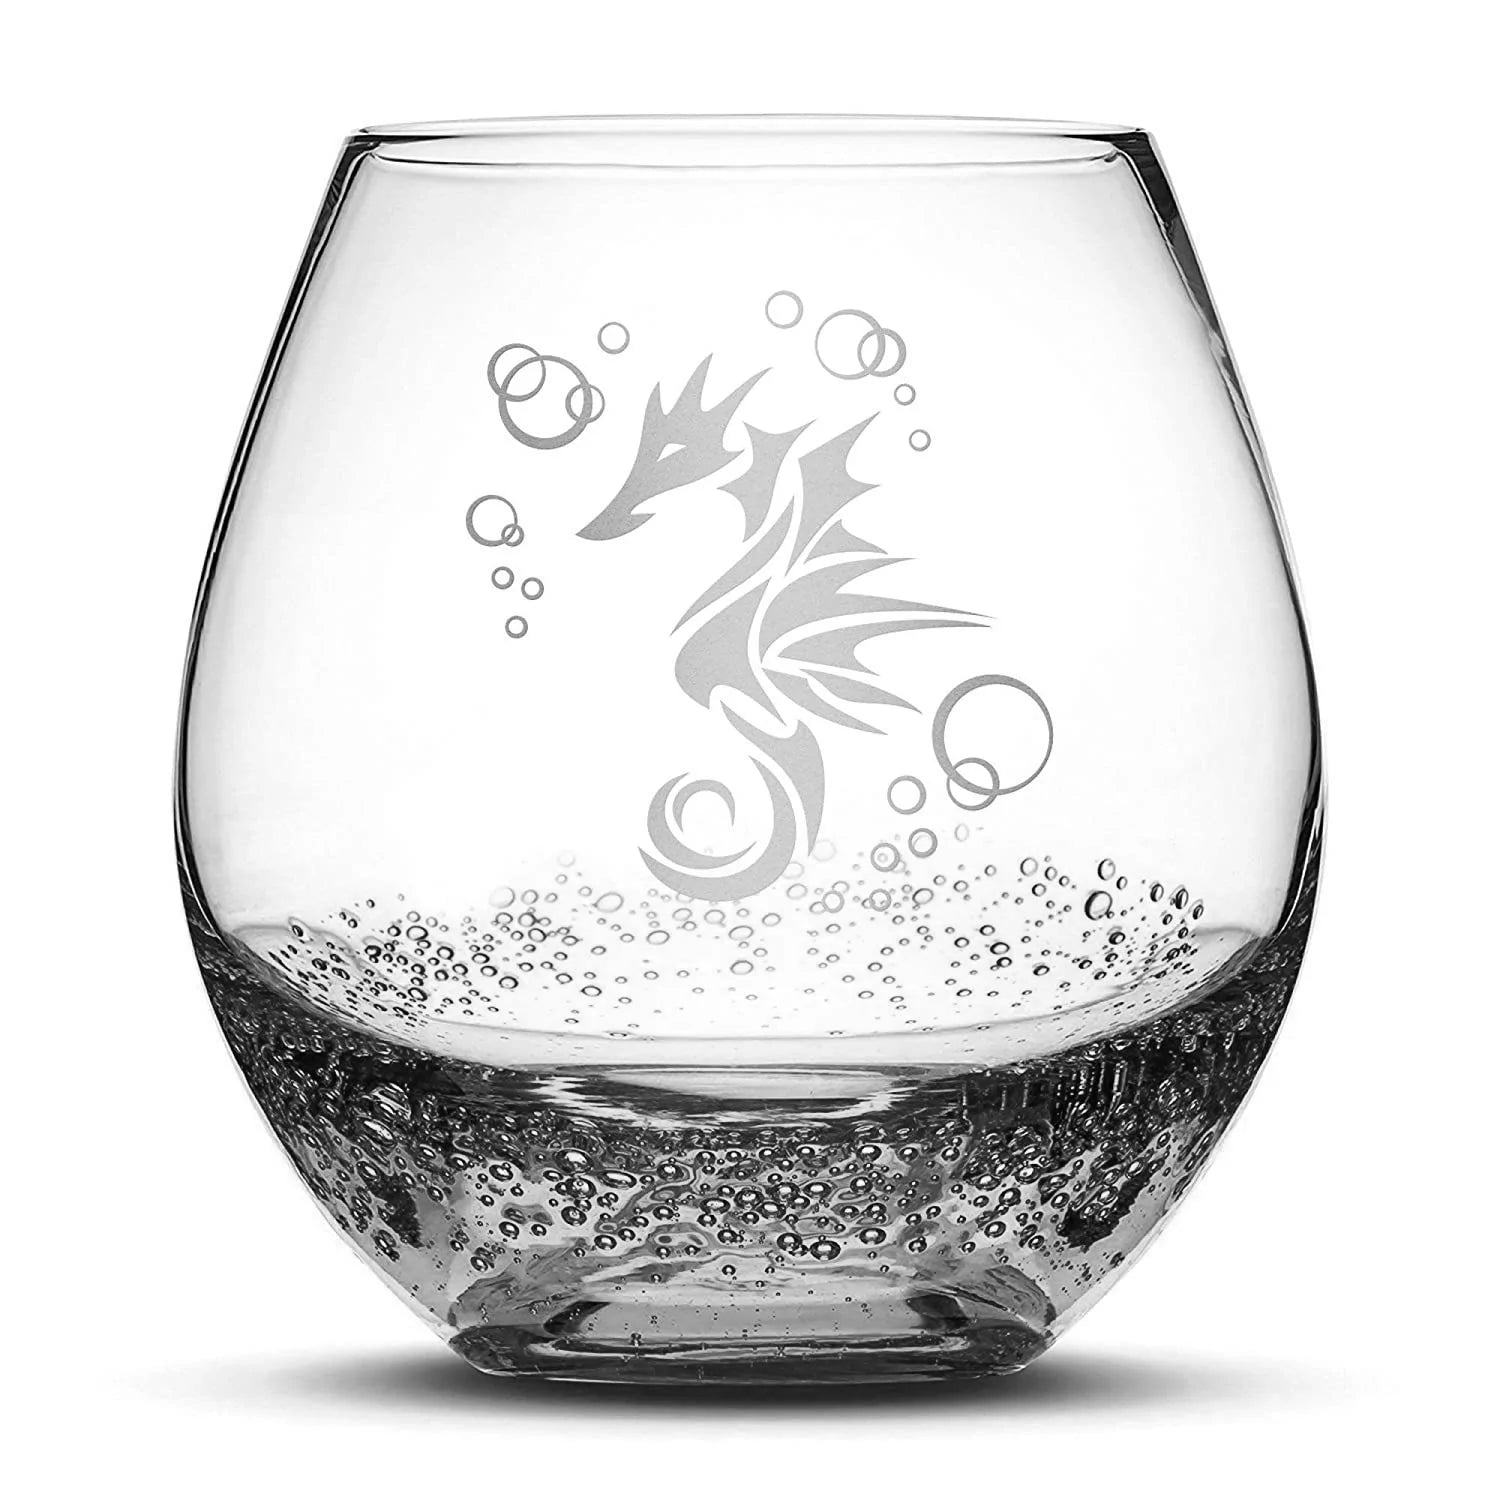 Less Than Perfect Bubble Wine Glass with Seahorse Design, Laser Etched or Hand Etched